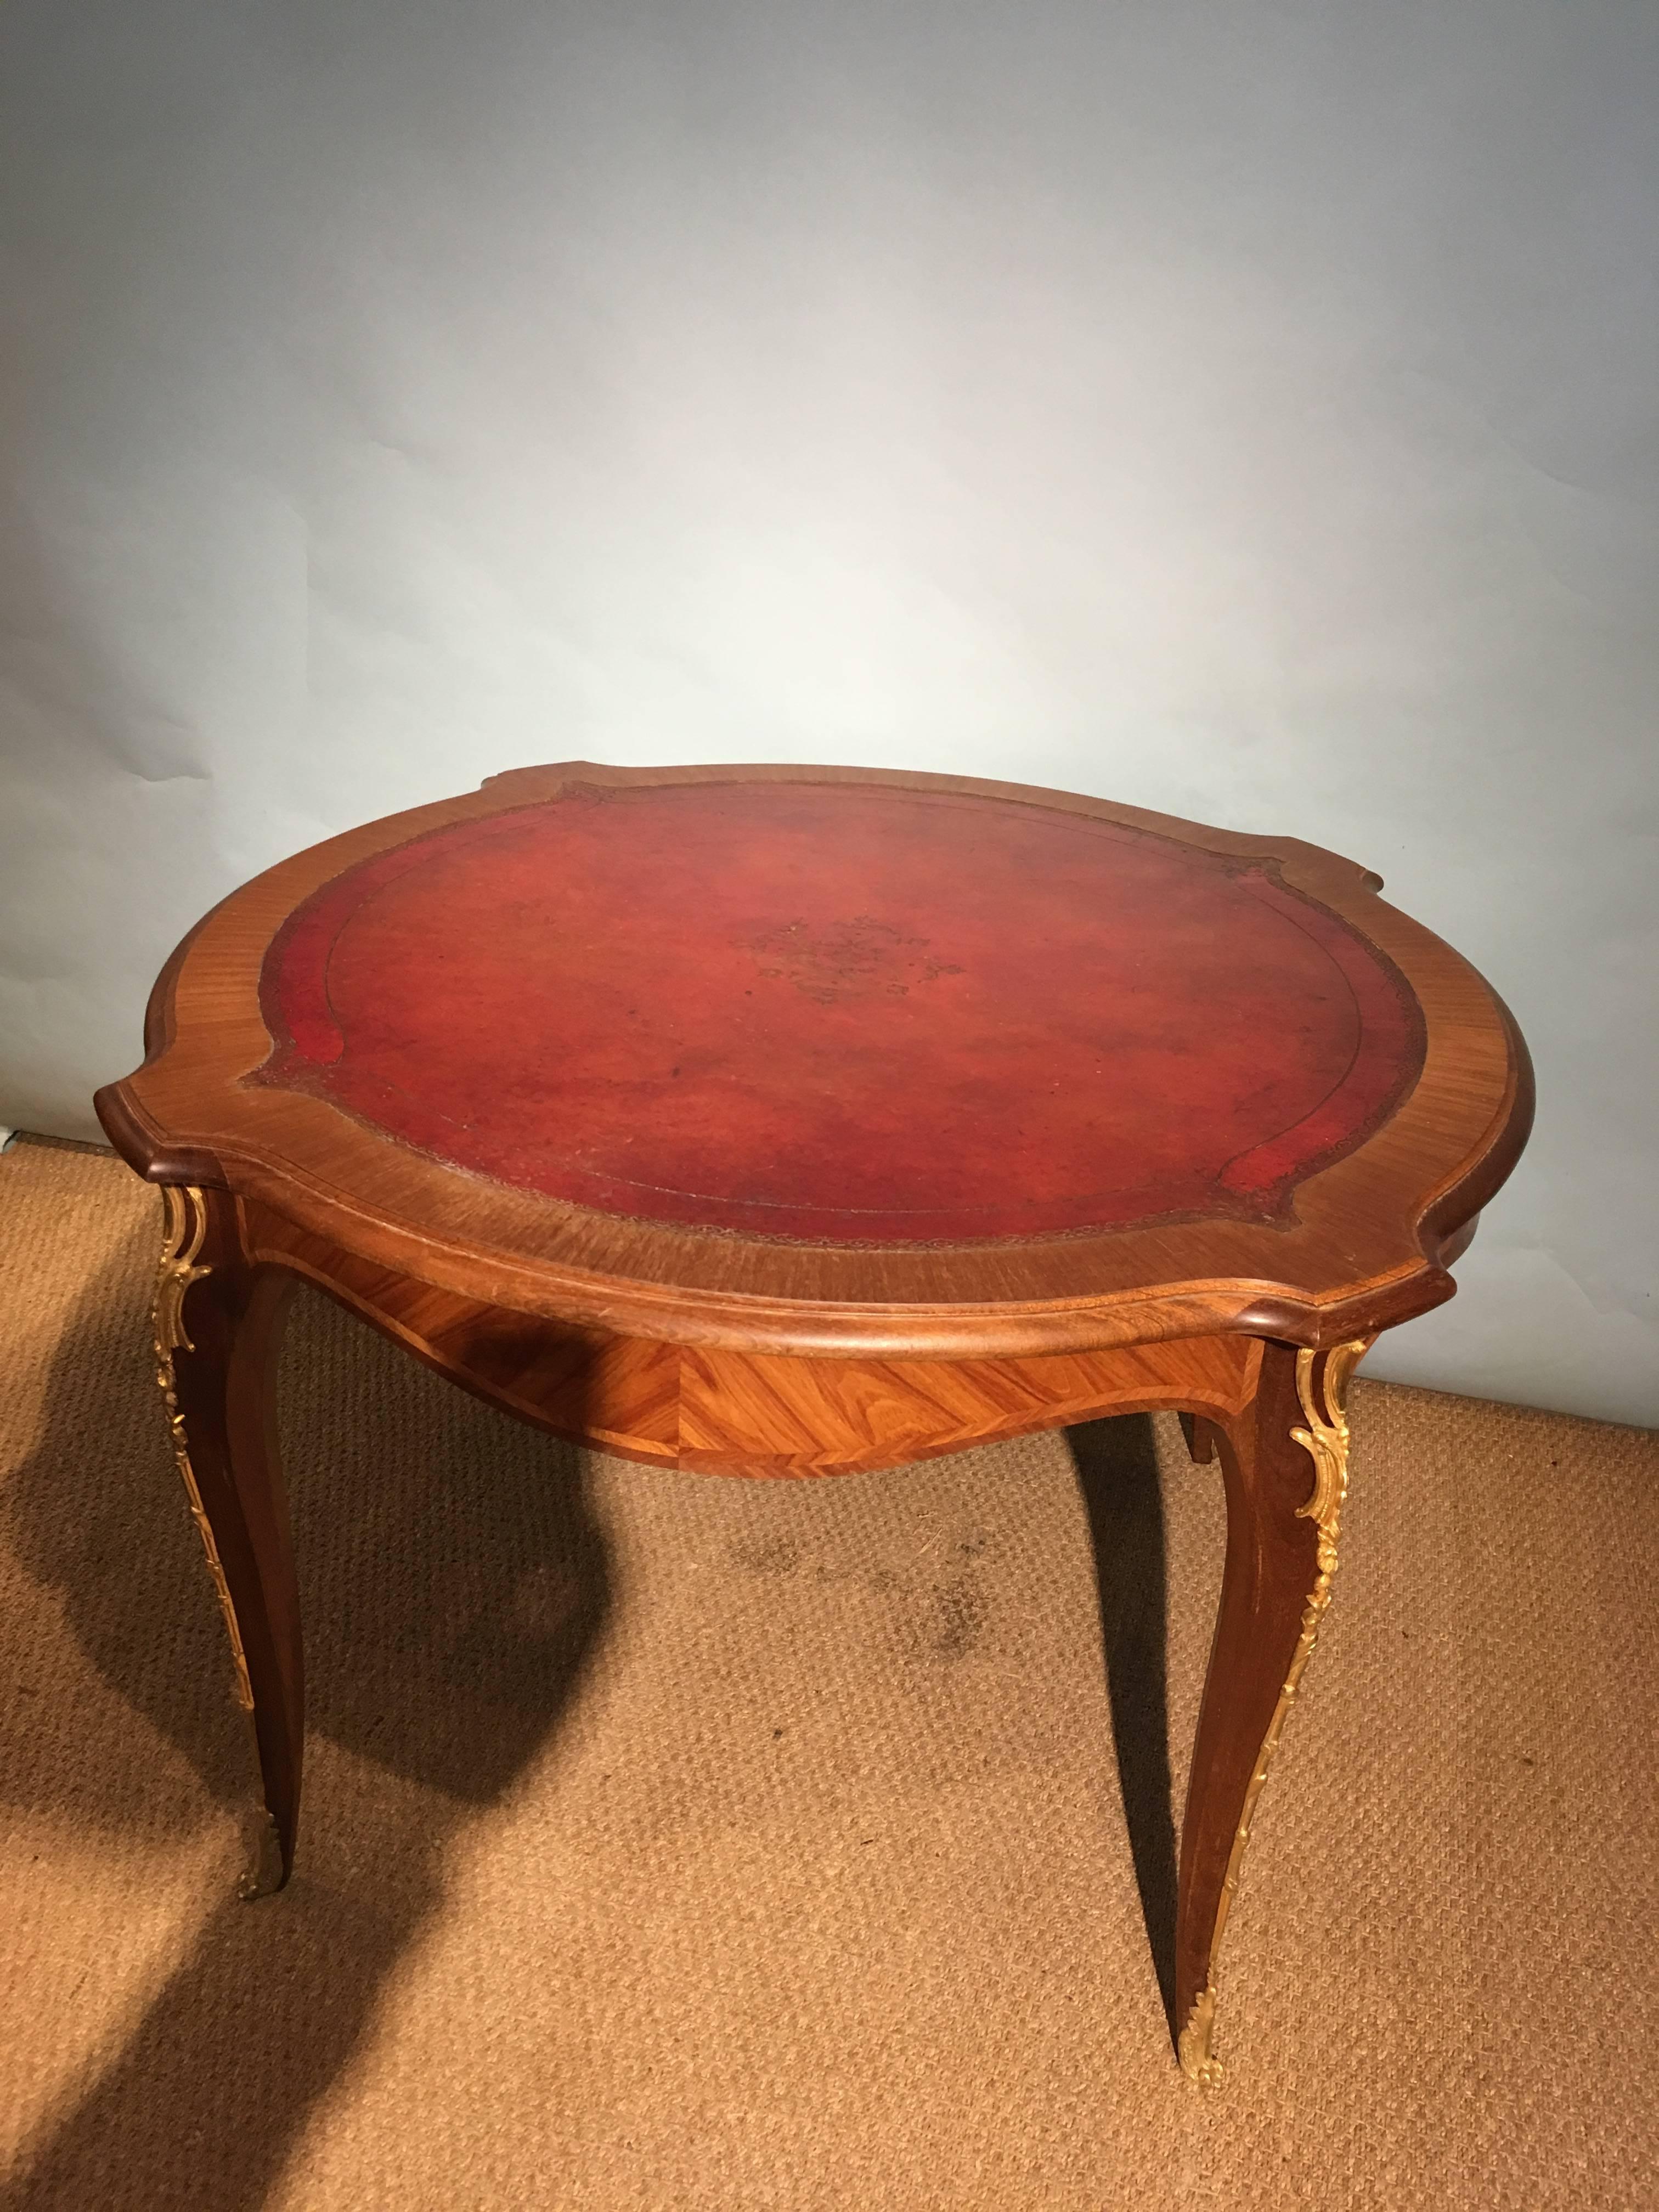 Very stylish center table or bridge table 

French dating to circa 1930s with original tooled leather insert Paris quality ormolu mounts 

Measure: Diameter 47 inches or 120 cms 
Height 29 inches or 75 cms.